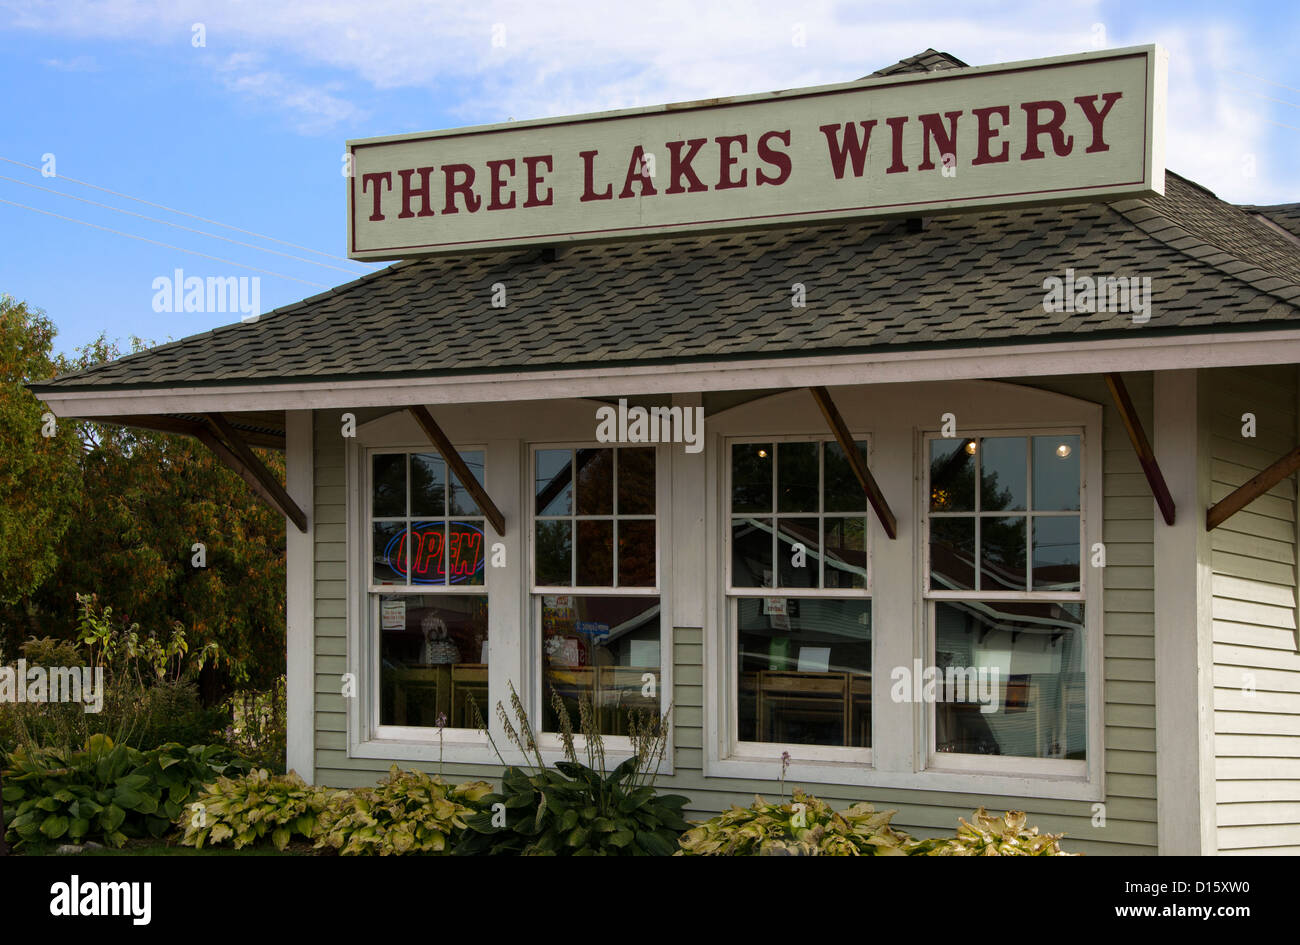 Three Lakes Winery in the Northwoods town of Three Lakes, Wisconsin. Stock Photo